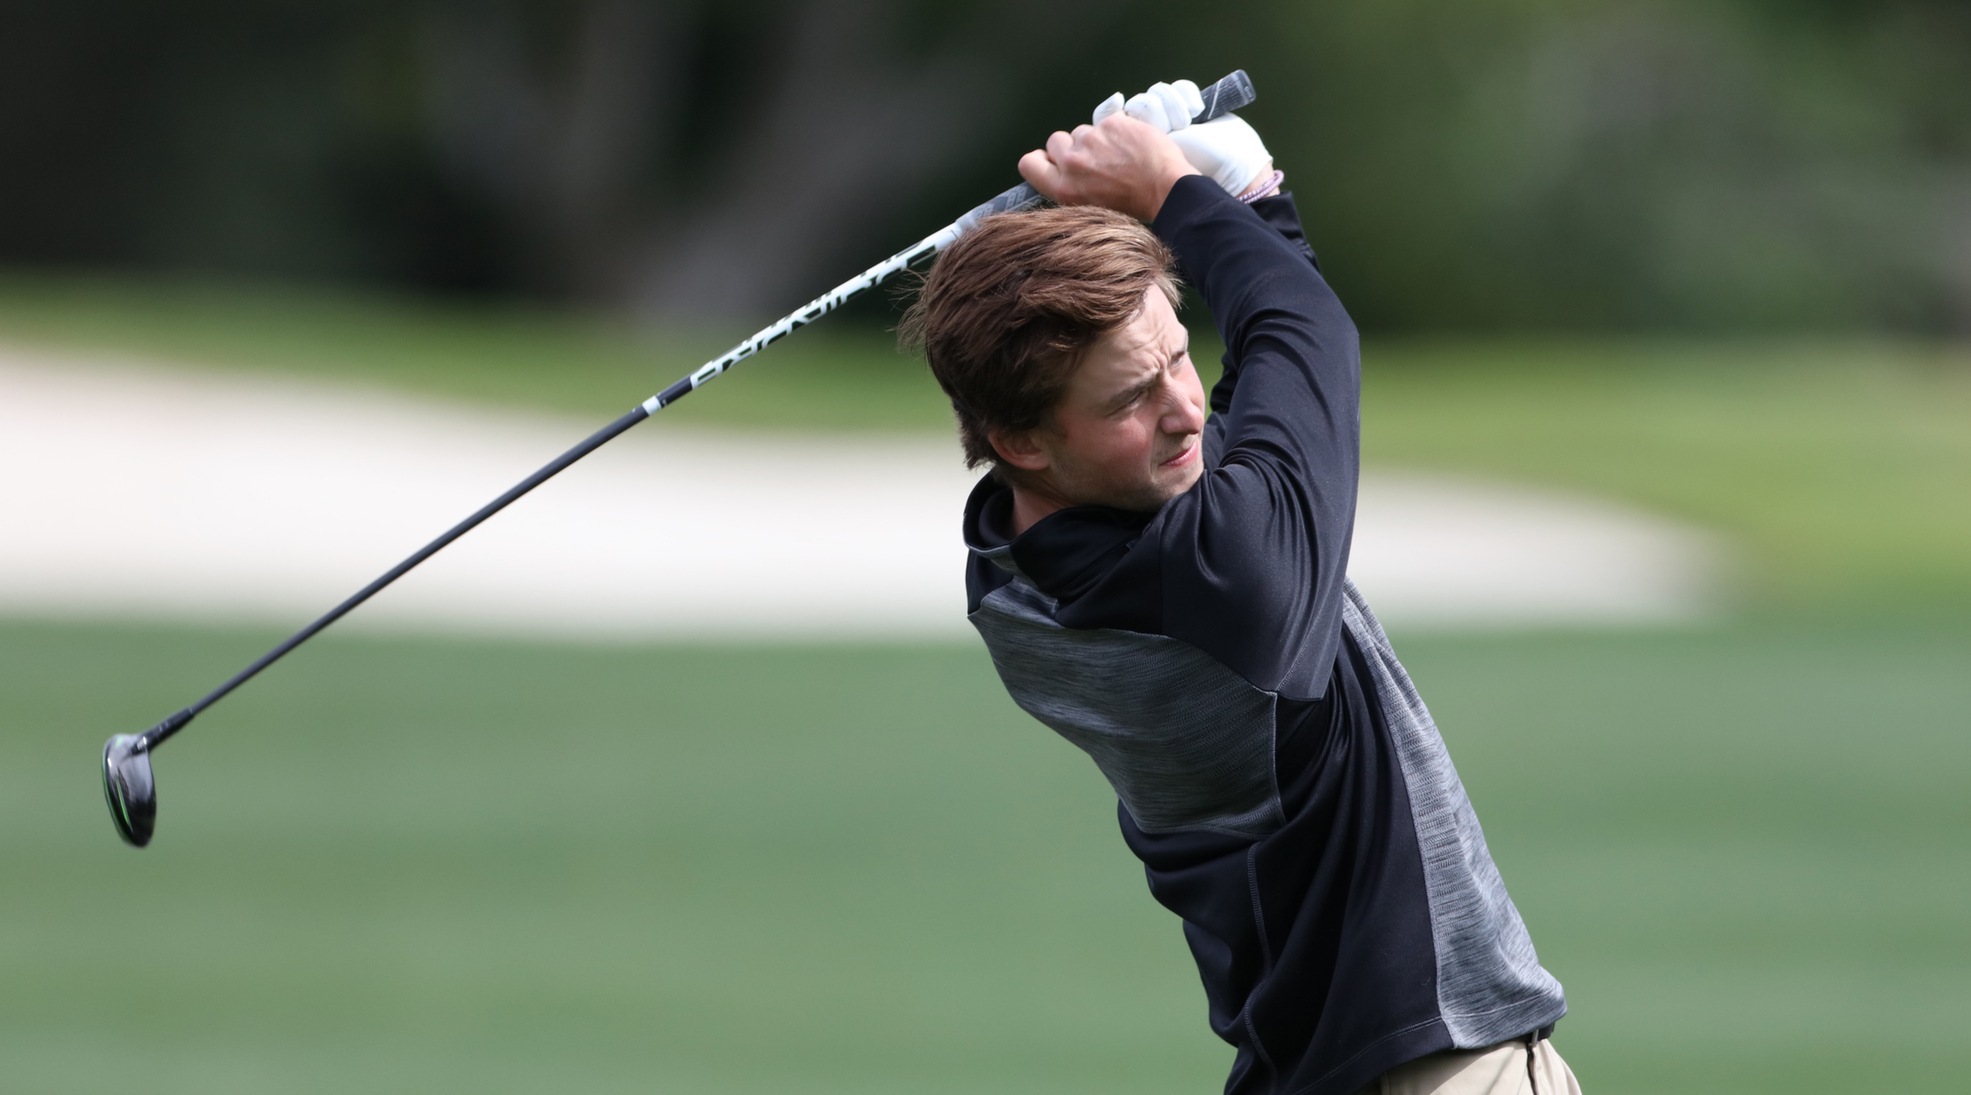 Second Round Play Suspended for Men’s Golf at the Farms Invitational